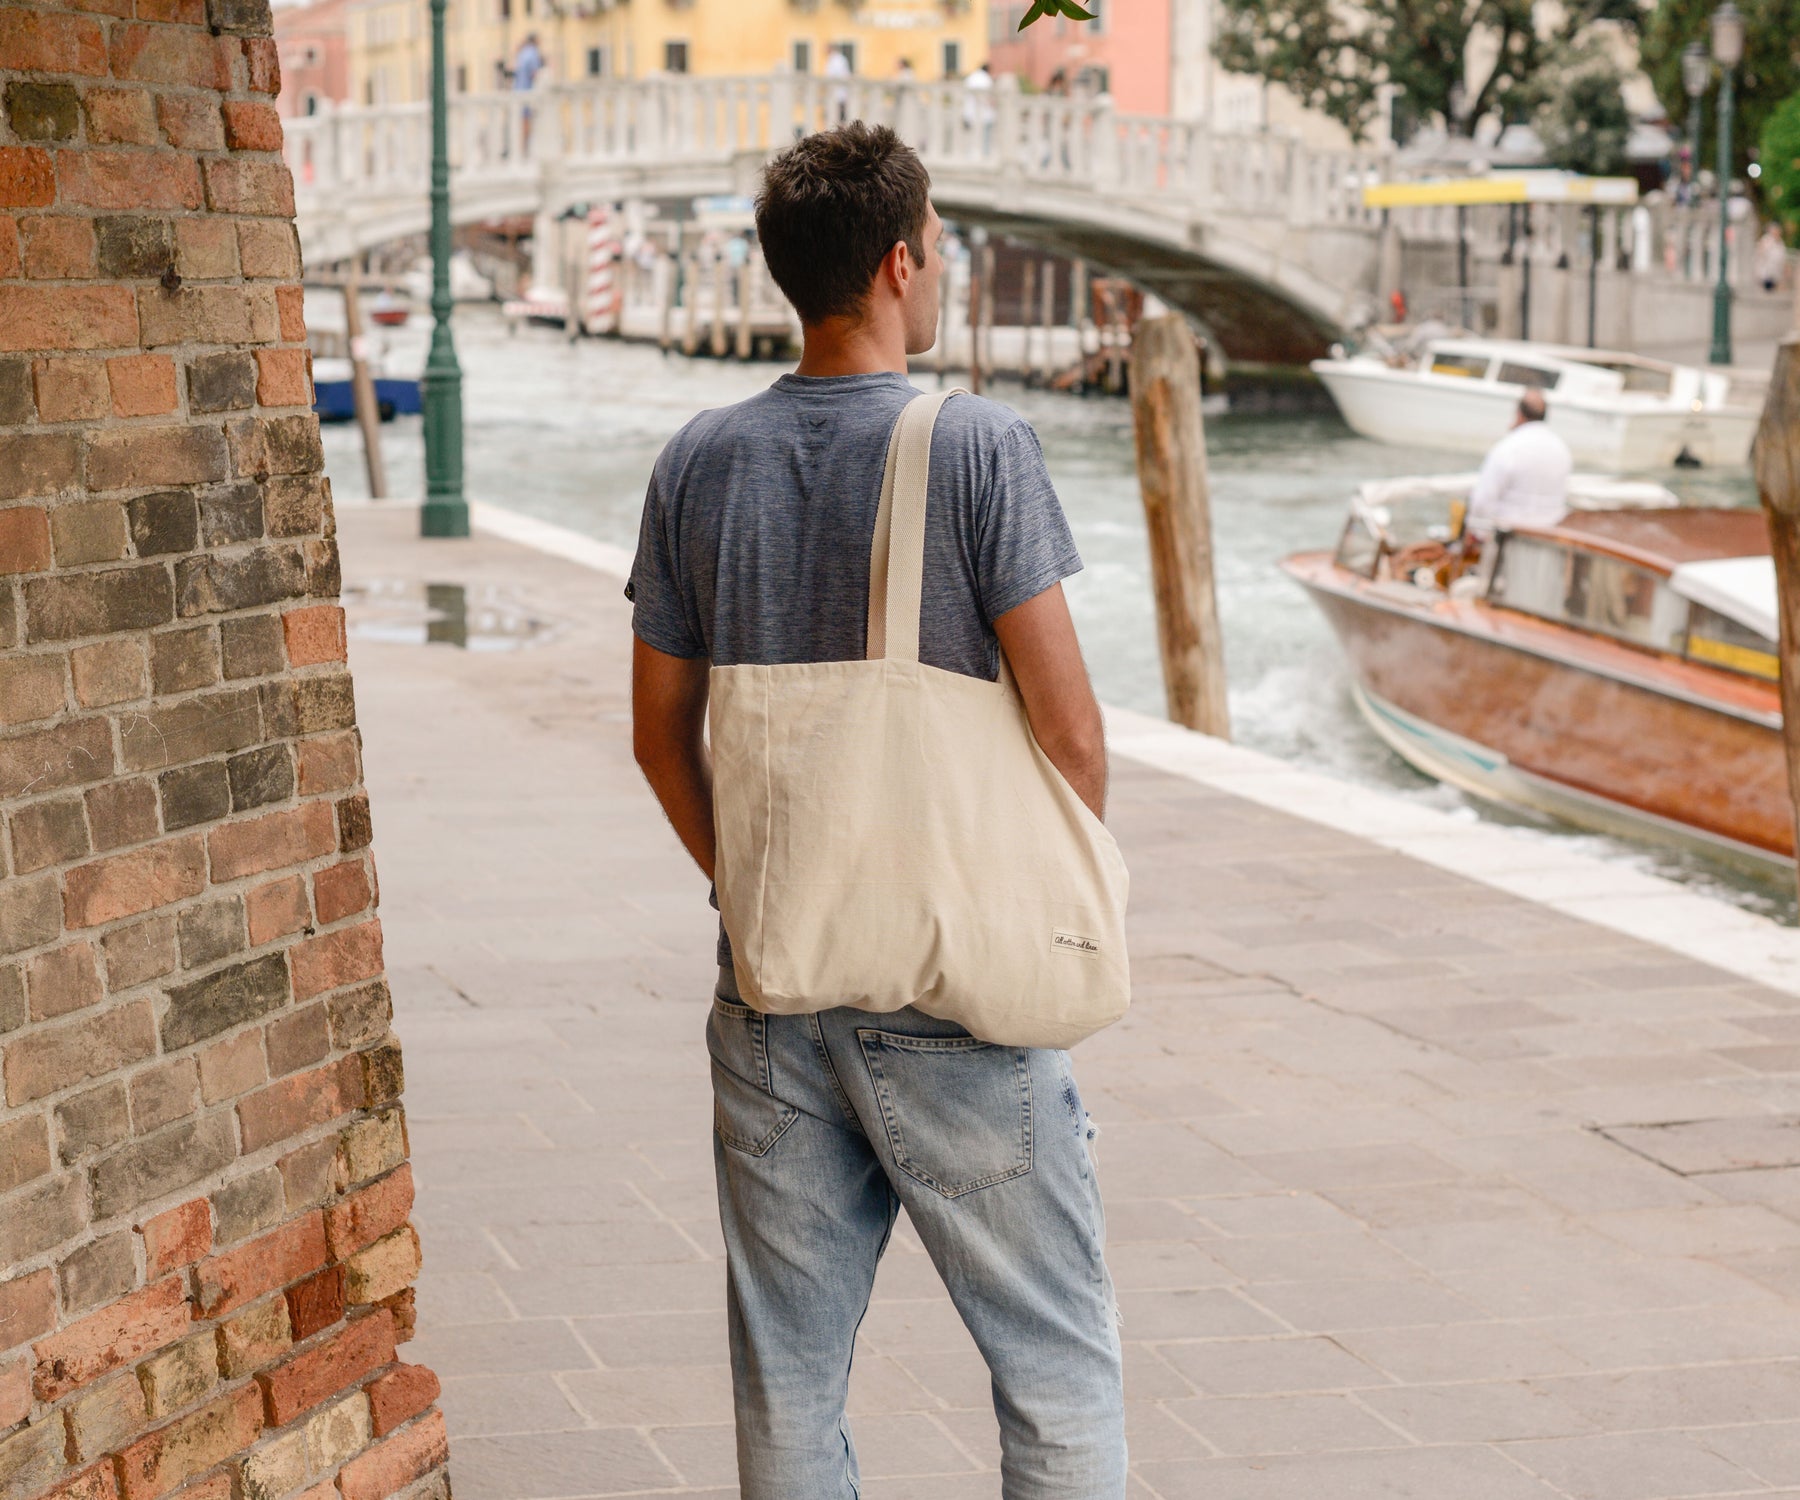 Designer Tote Bags for Men  New Arrivals on FARFETCH